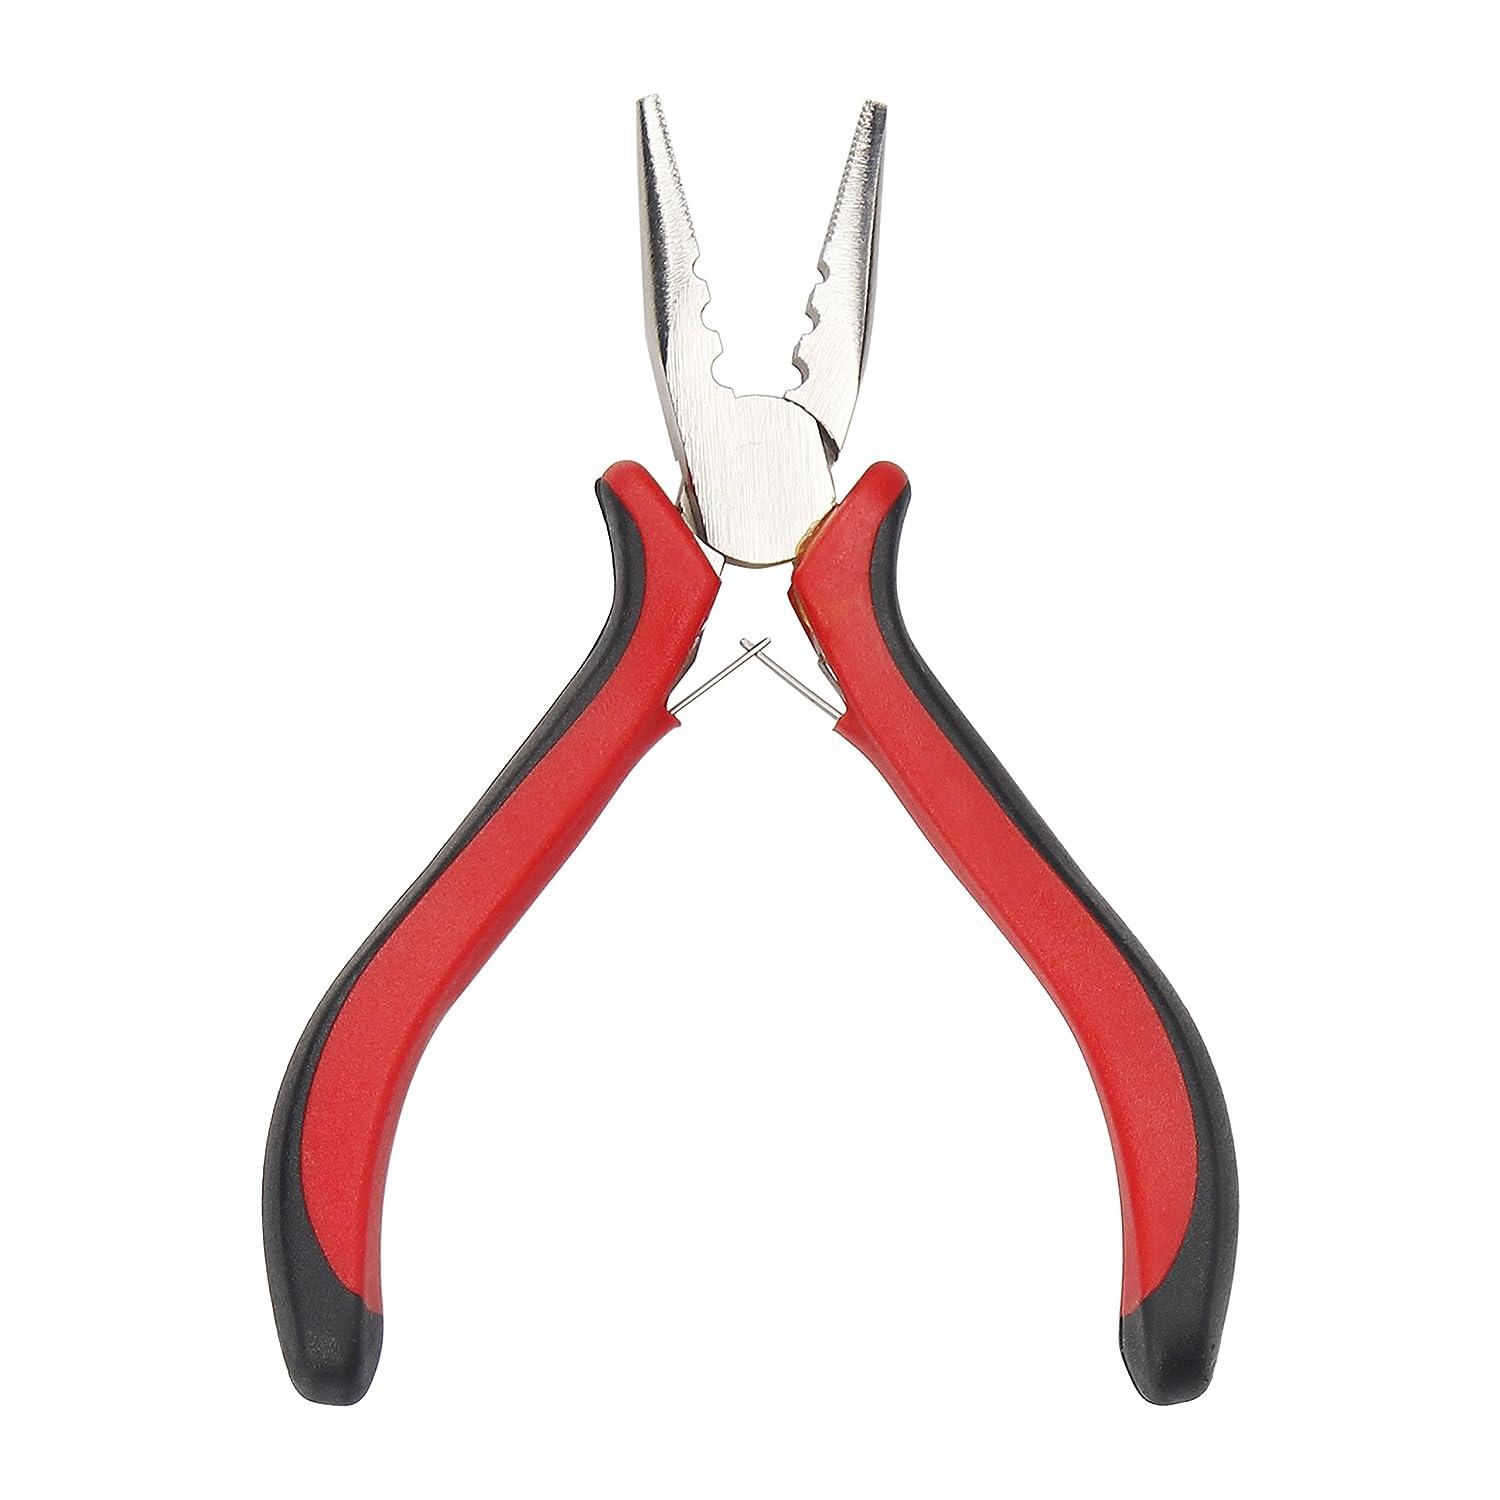 Needle Nose Pliers with 3 Holes Serrated Jaws Mini Plier for Micro